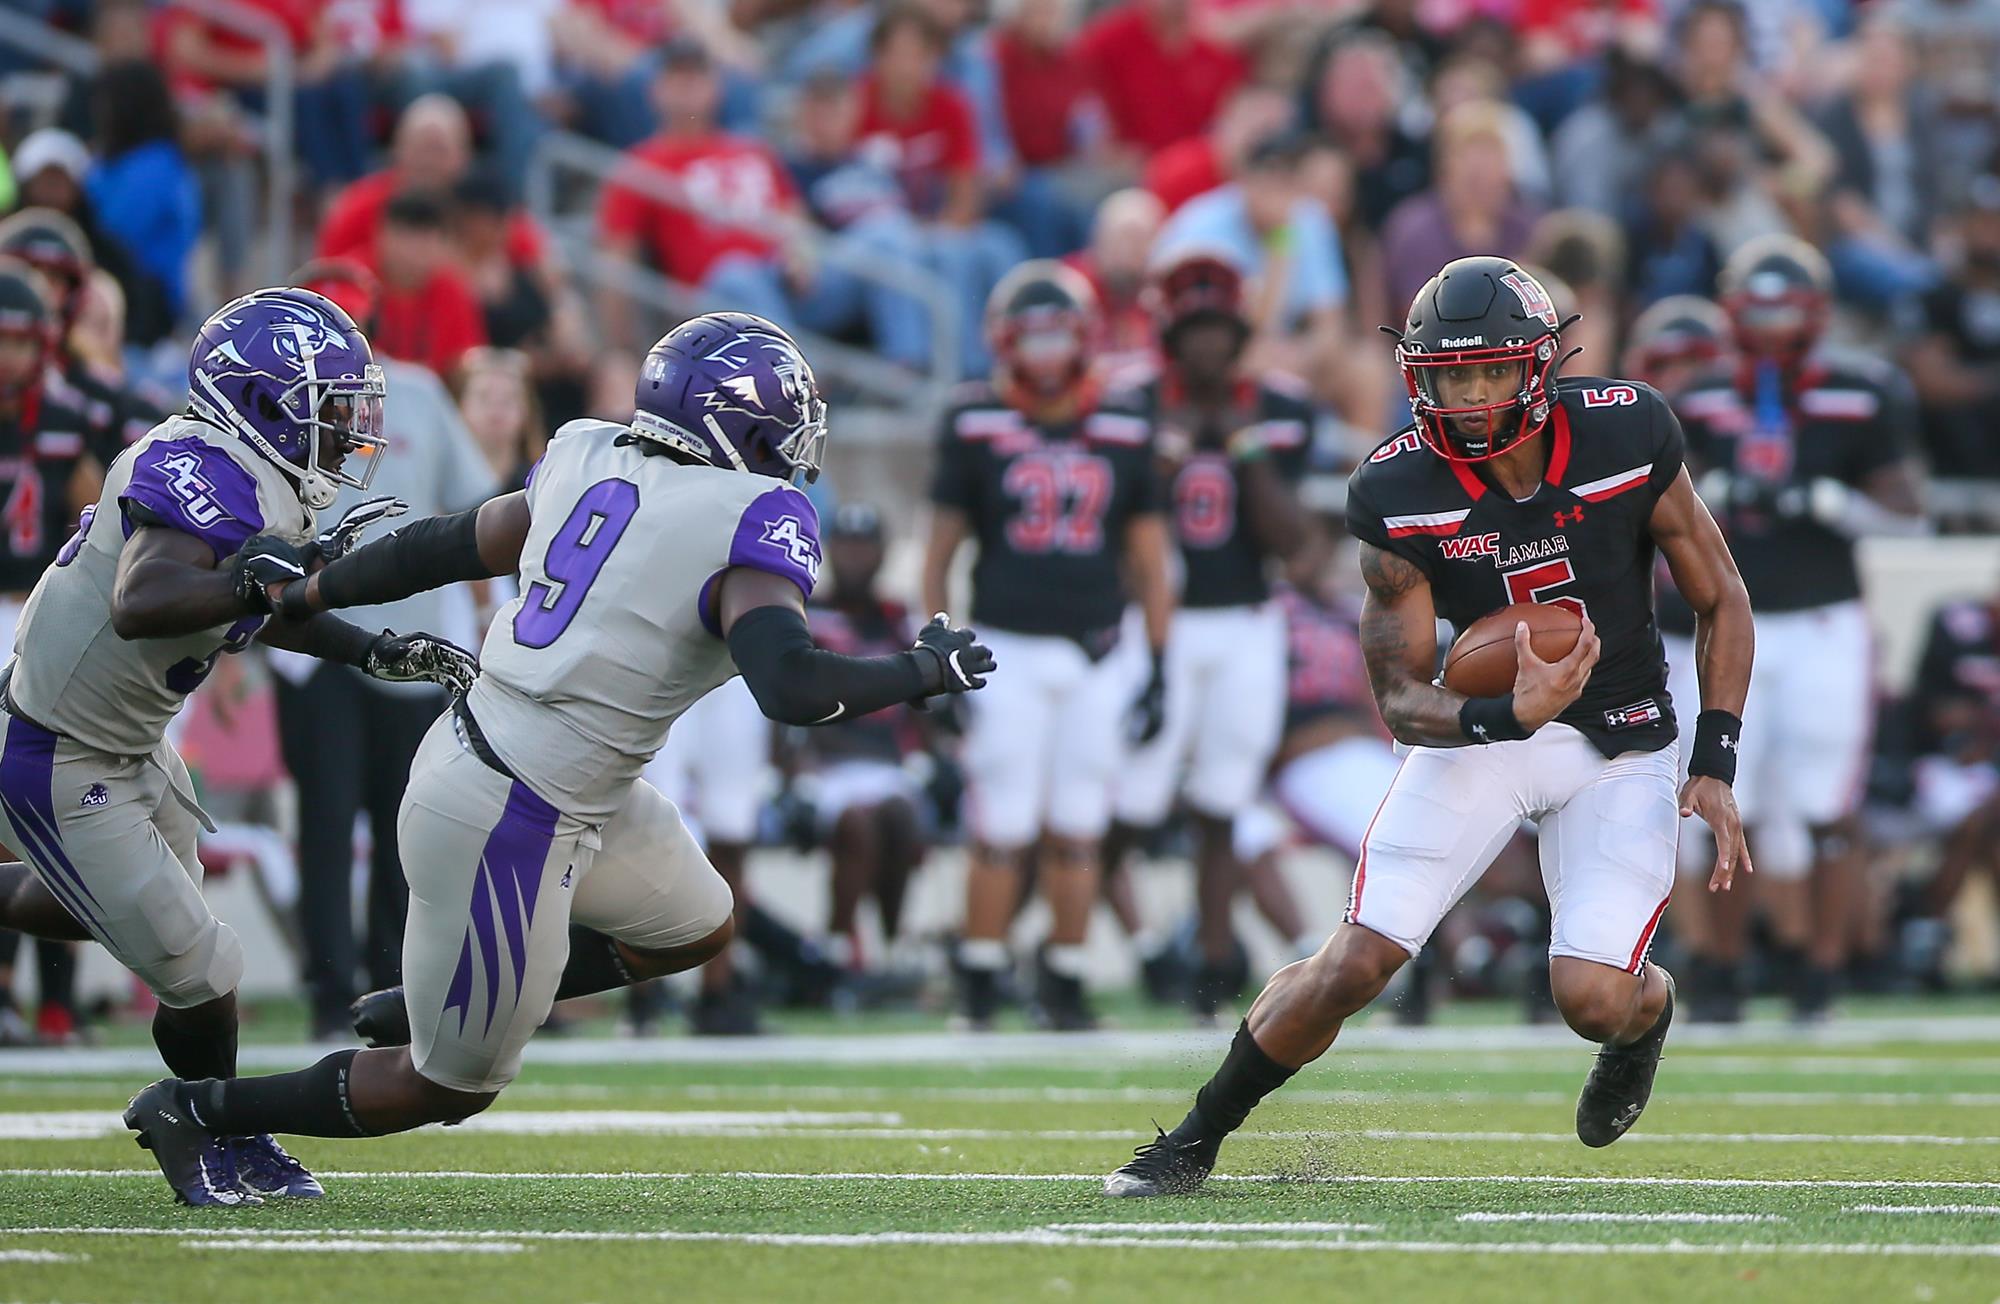 Jalen Dummett the quarterback-turned-receiver from Lamar recently sat down with Evan Willsmore from NFL Draft Diamonds.